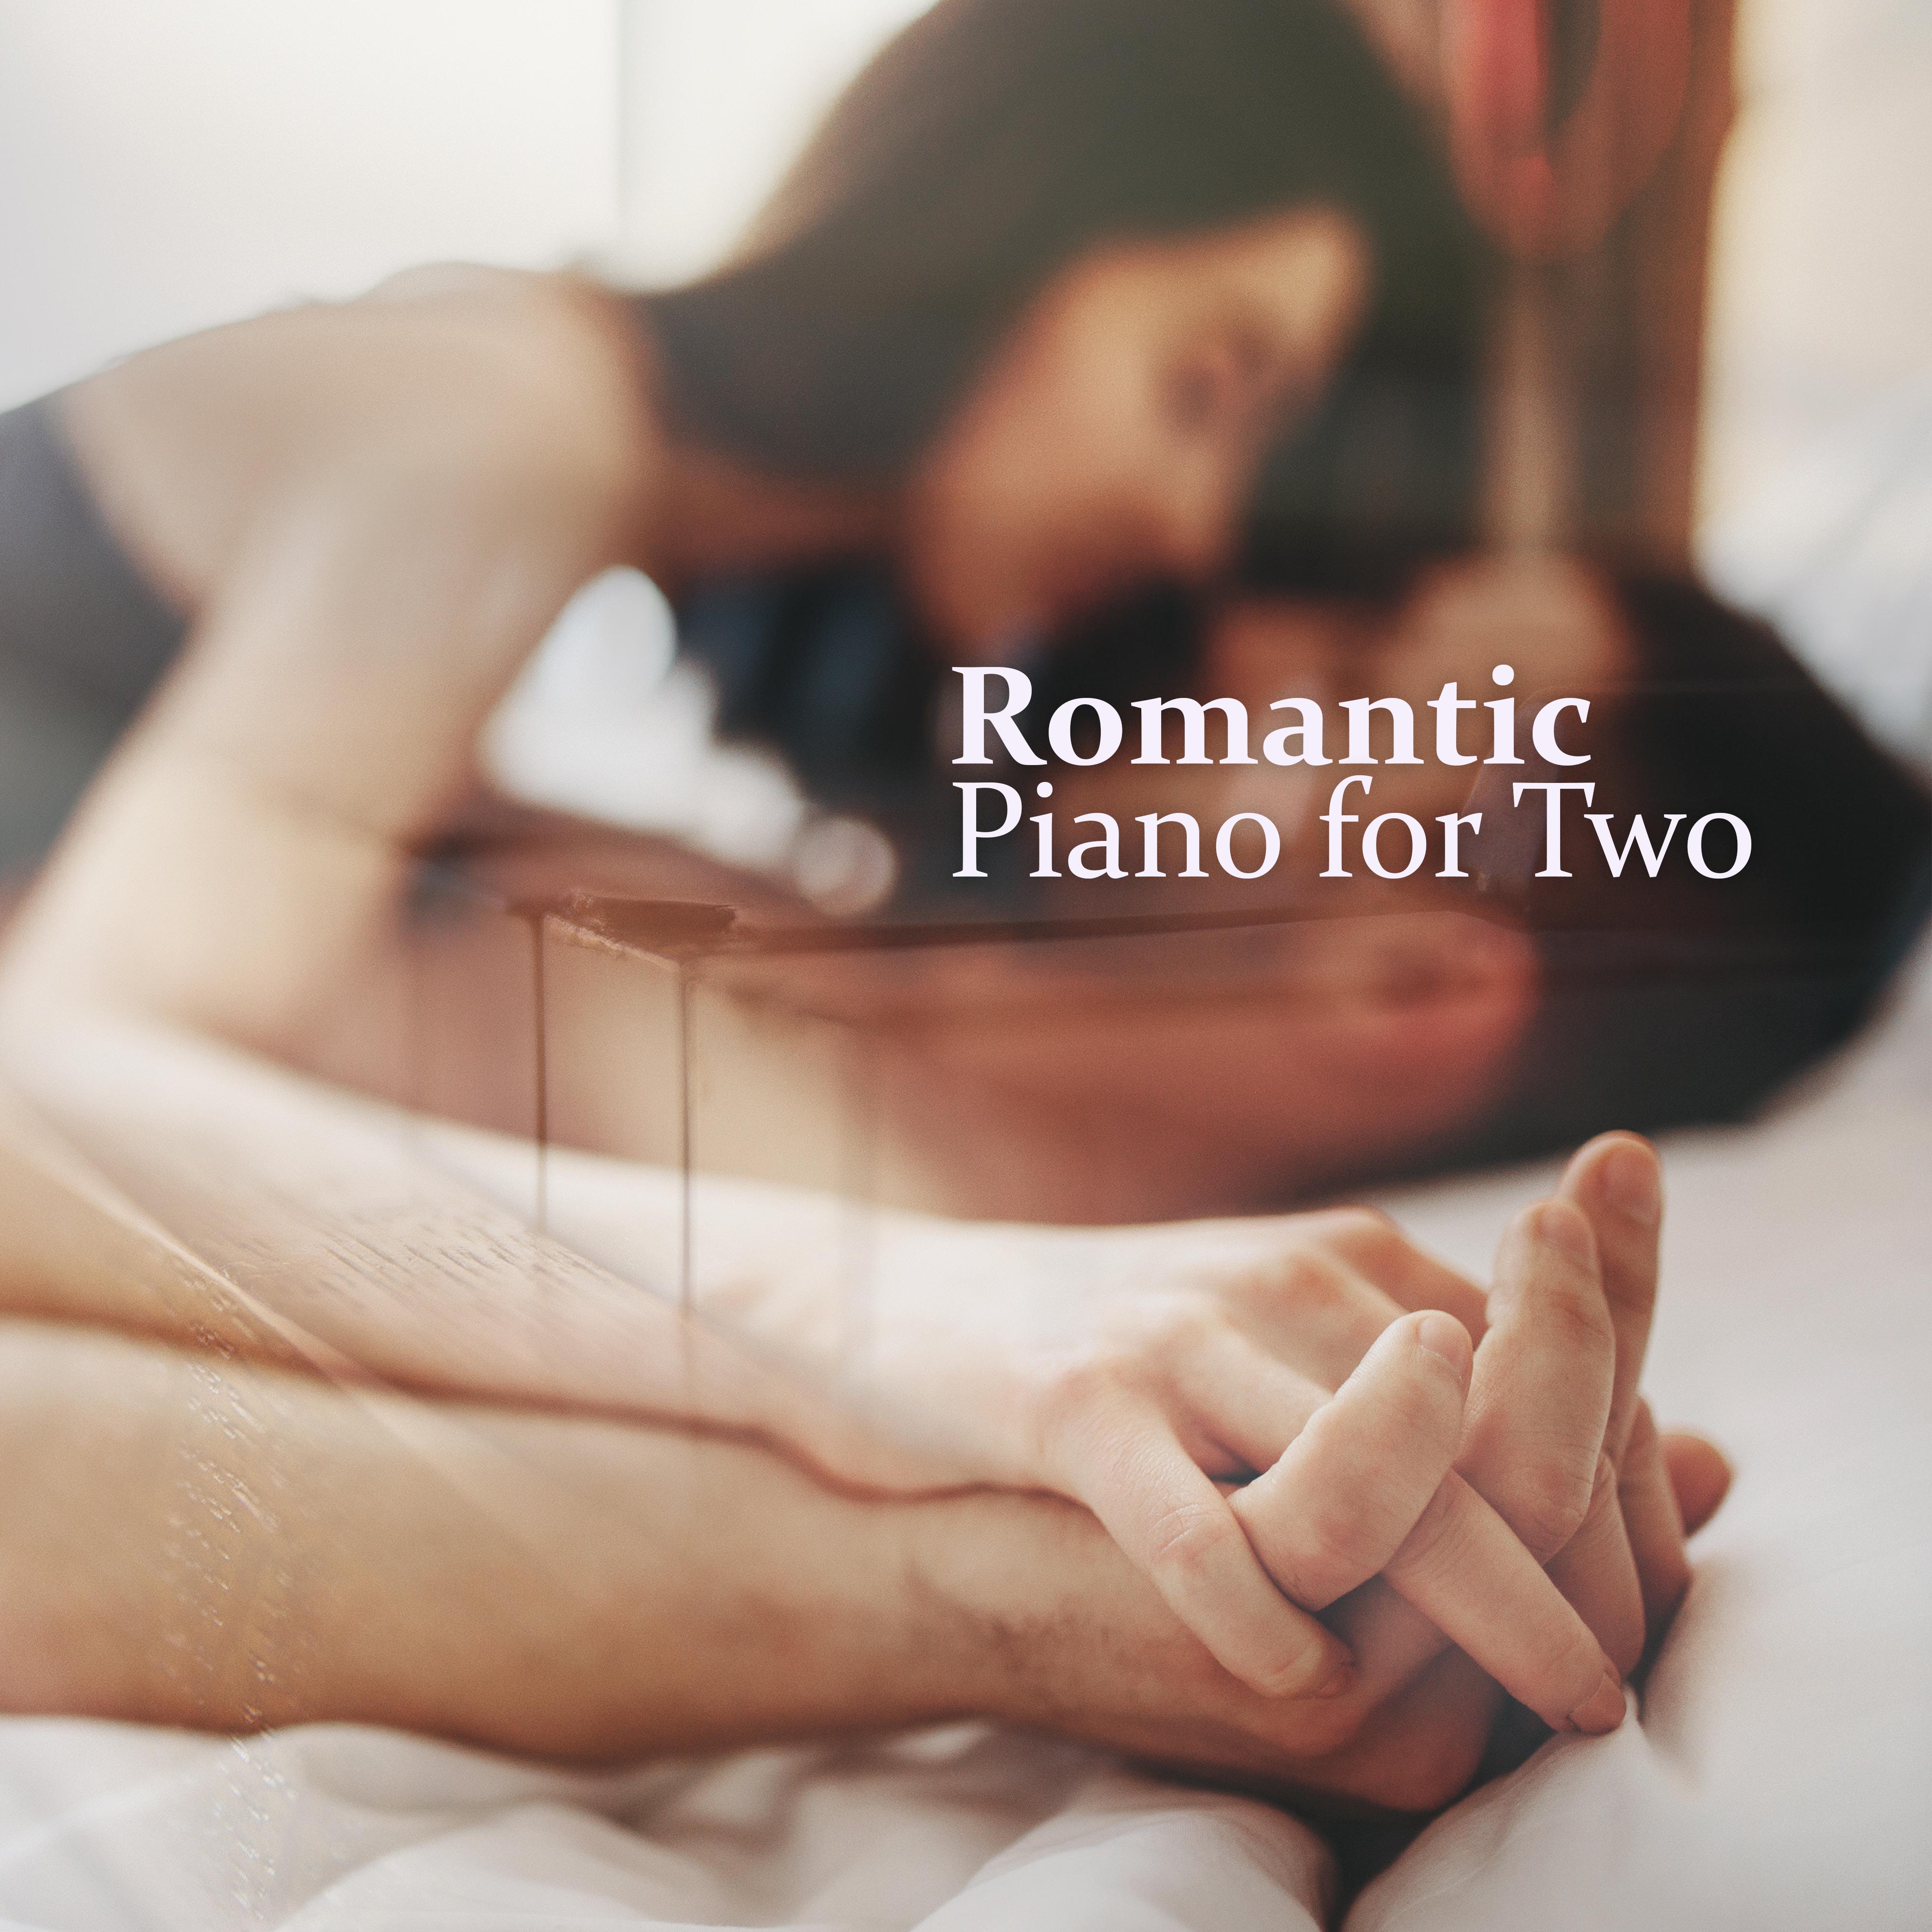 Romantic Piano for Two